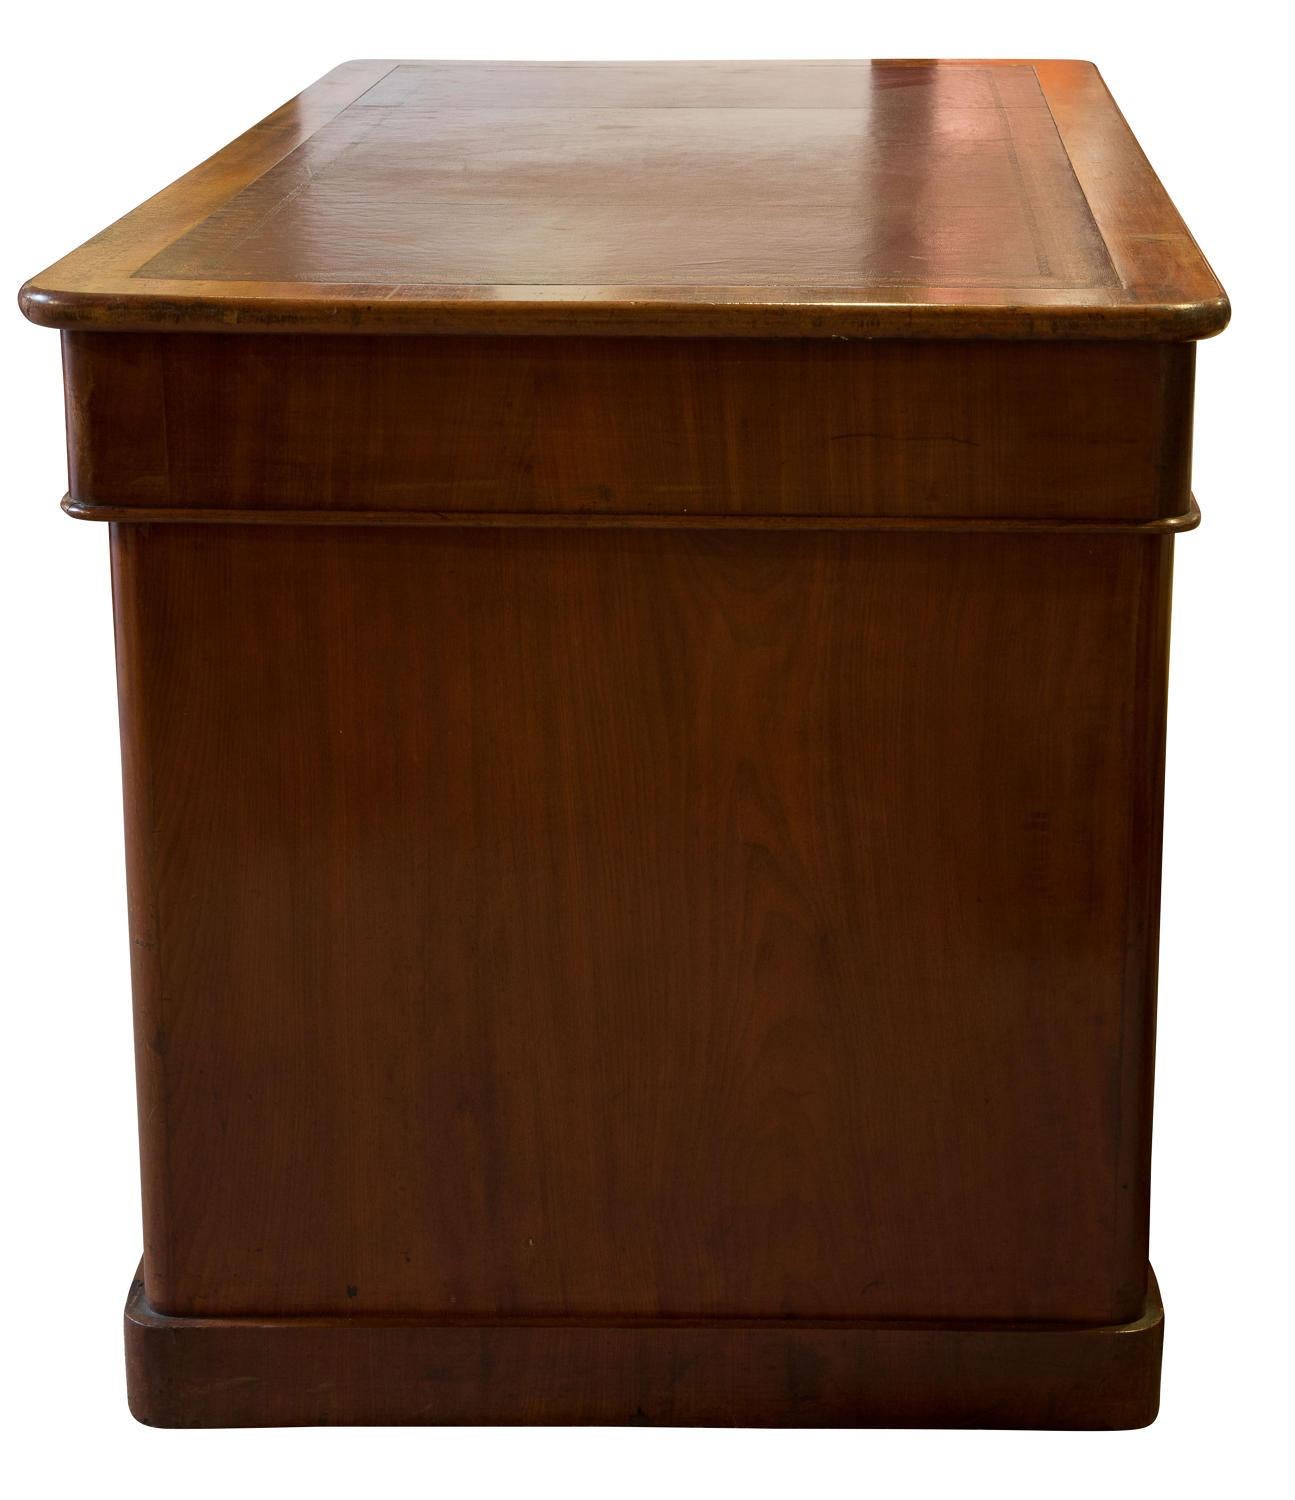 Victorian mahogany twin pedestal desk of 9 drawers, the pedestals with locking side bars. The top with maroon leather inset. Retaining all its original turned knobs,

 
circa 1860.